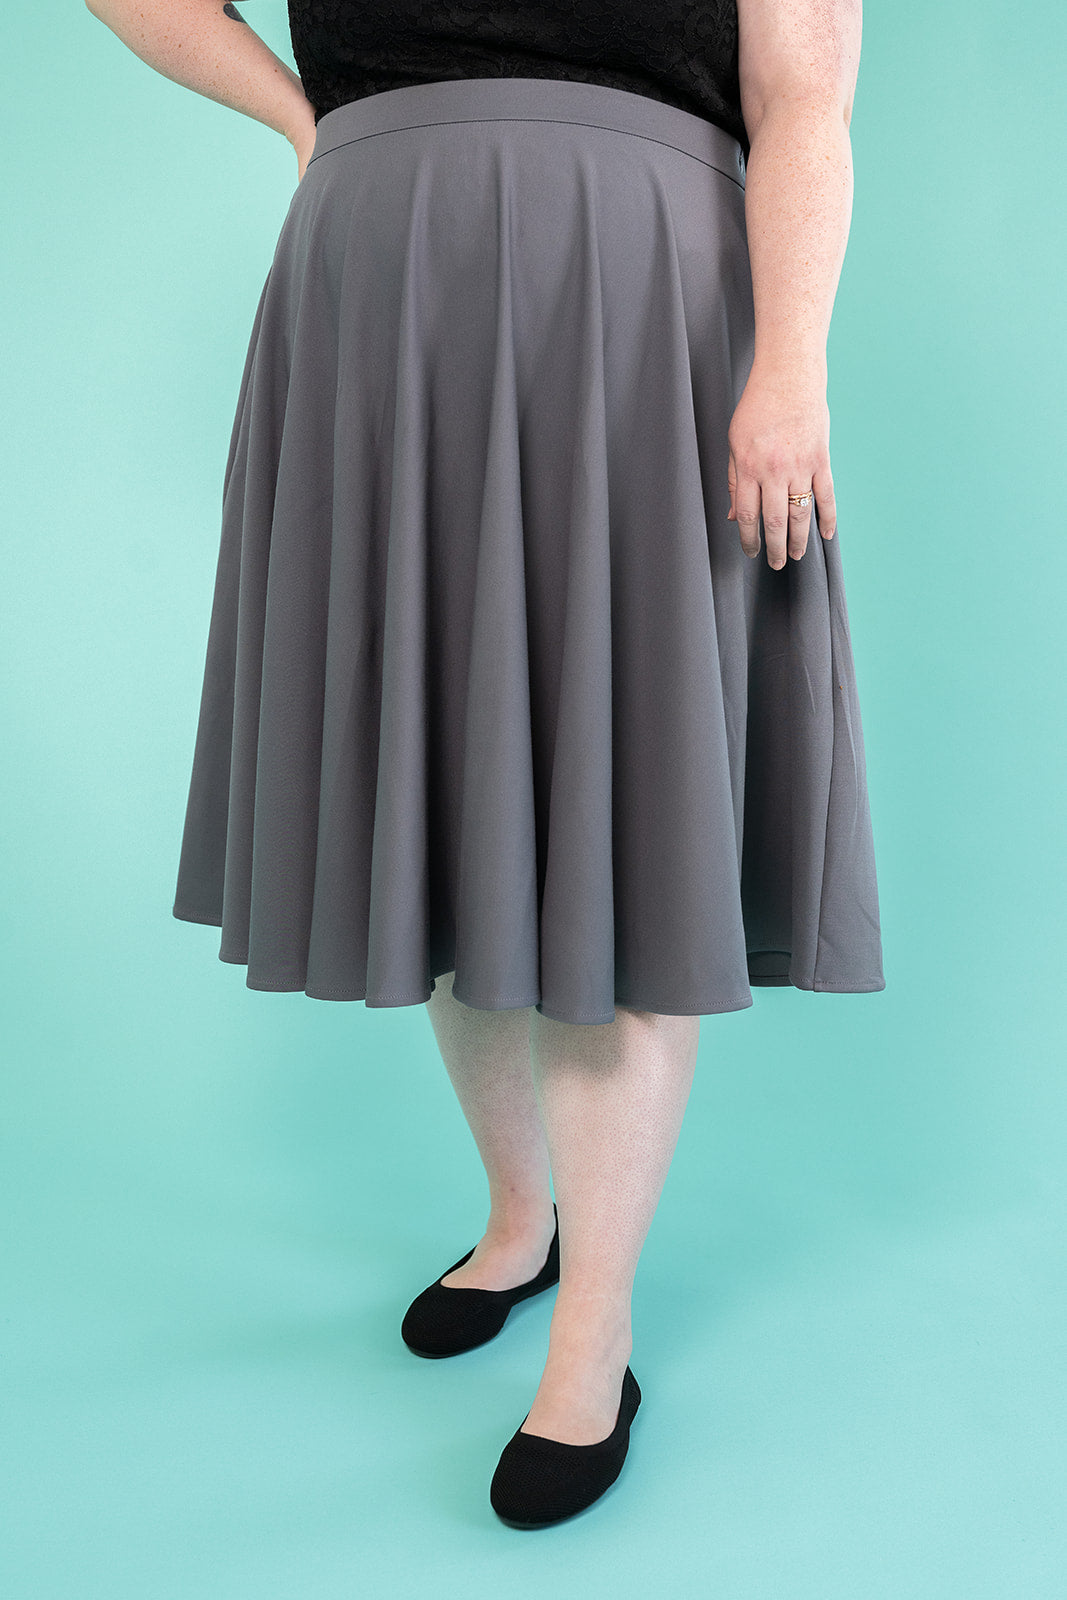 Photo of a person in a black top and grey skirt. the photo background is teal and they are wearing black flat shoes.